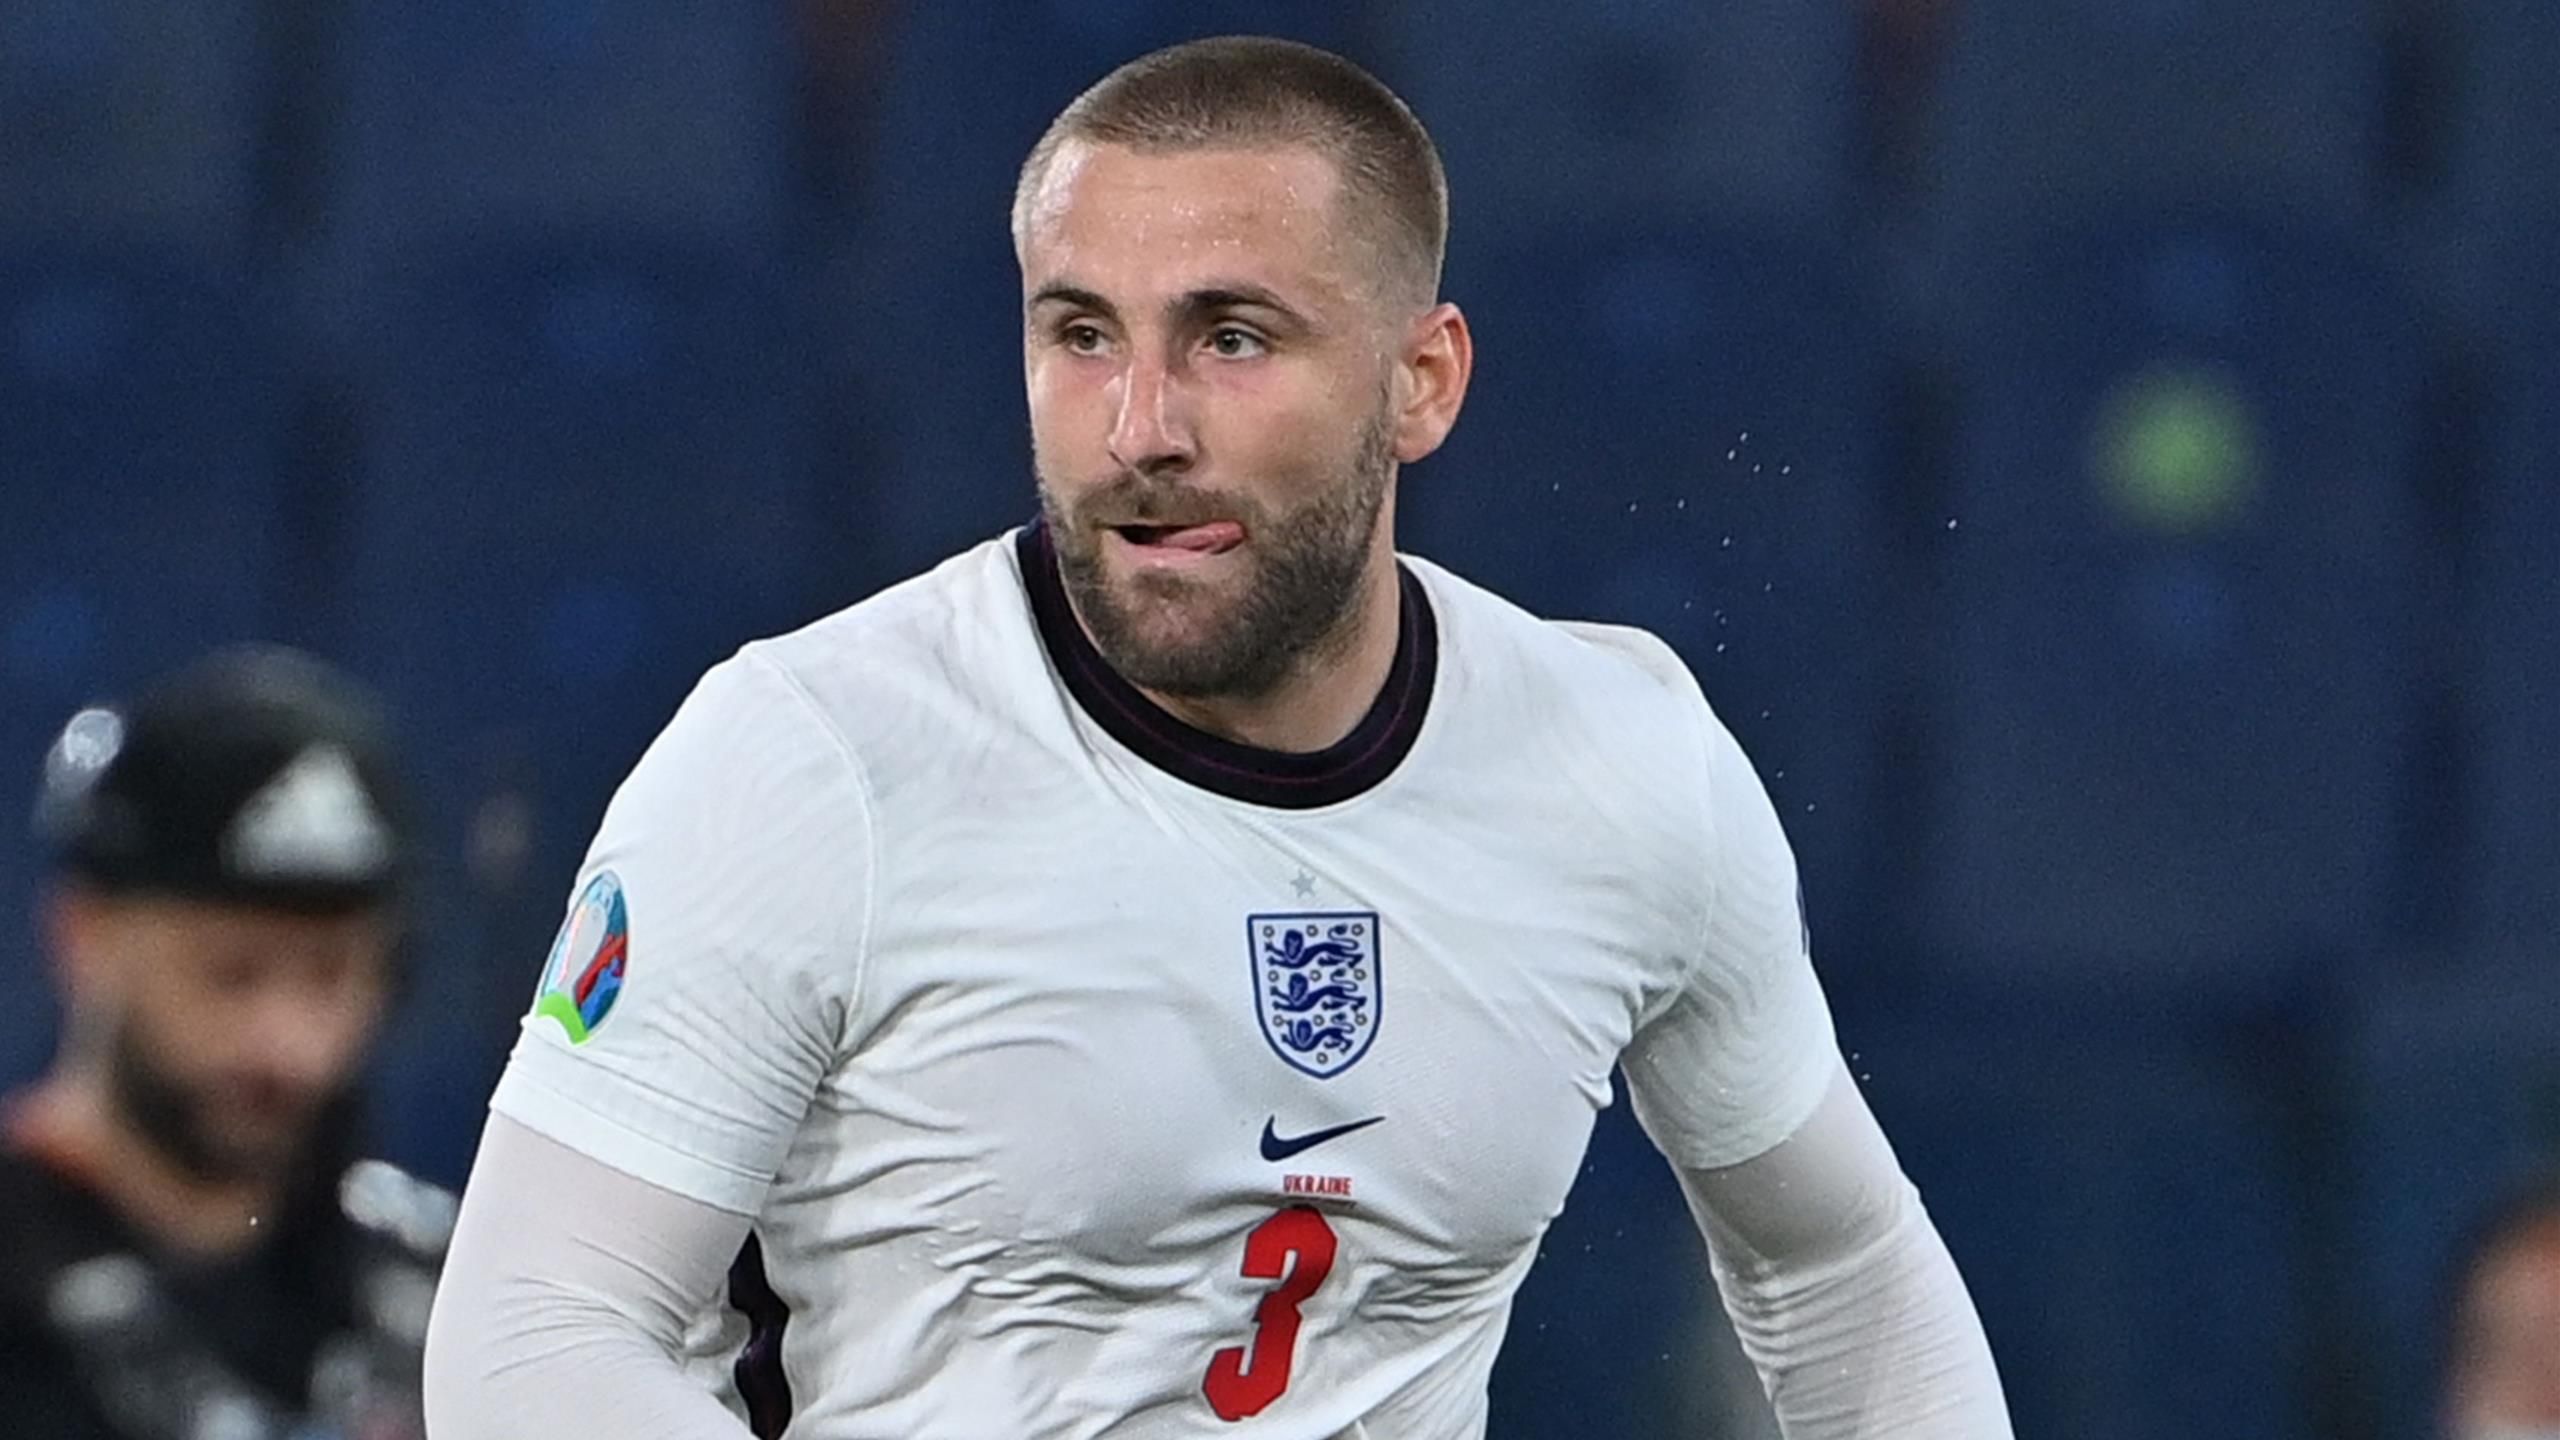 Luke Shaw played Euro 2020 knockout stages with broken ribs, could be a  doubt for Man Utd season opener - reports - Eurosport